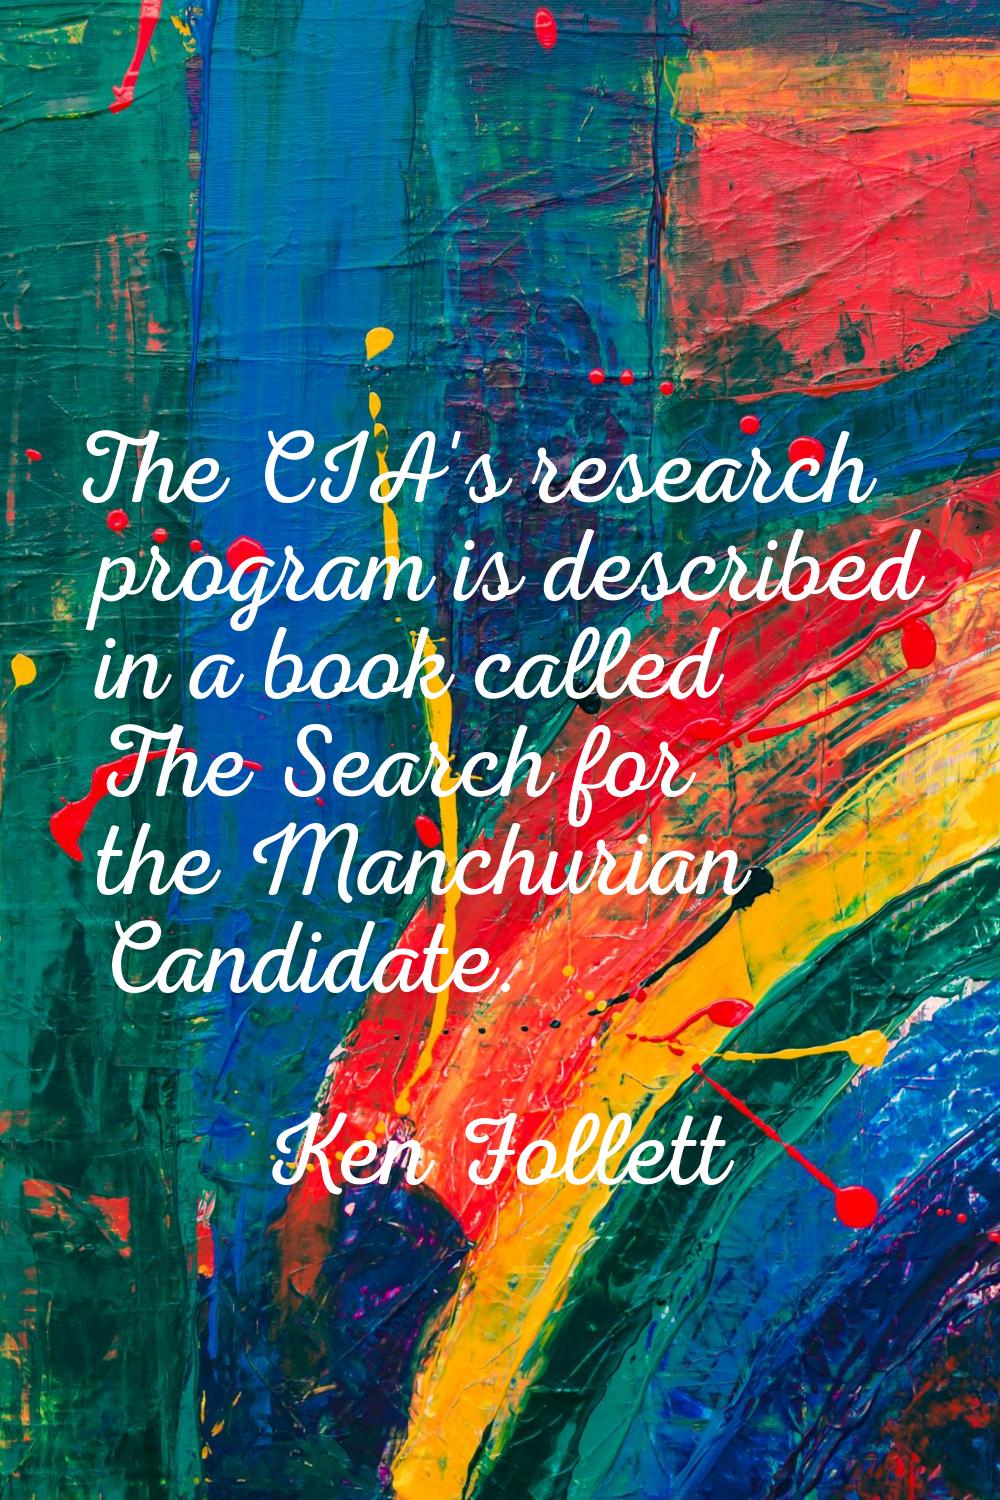 The CIA's research program is described in a book called The Search for the Manchurian Candidate.